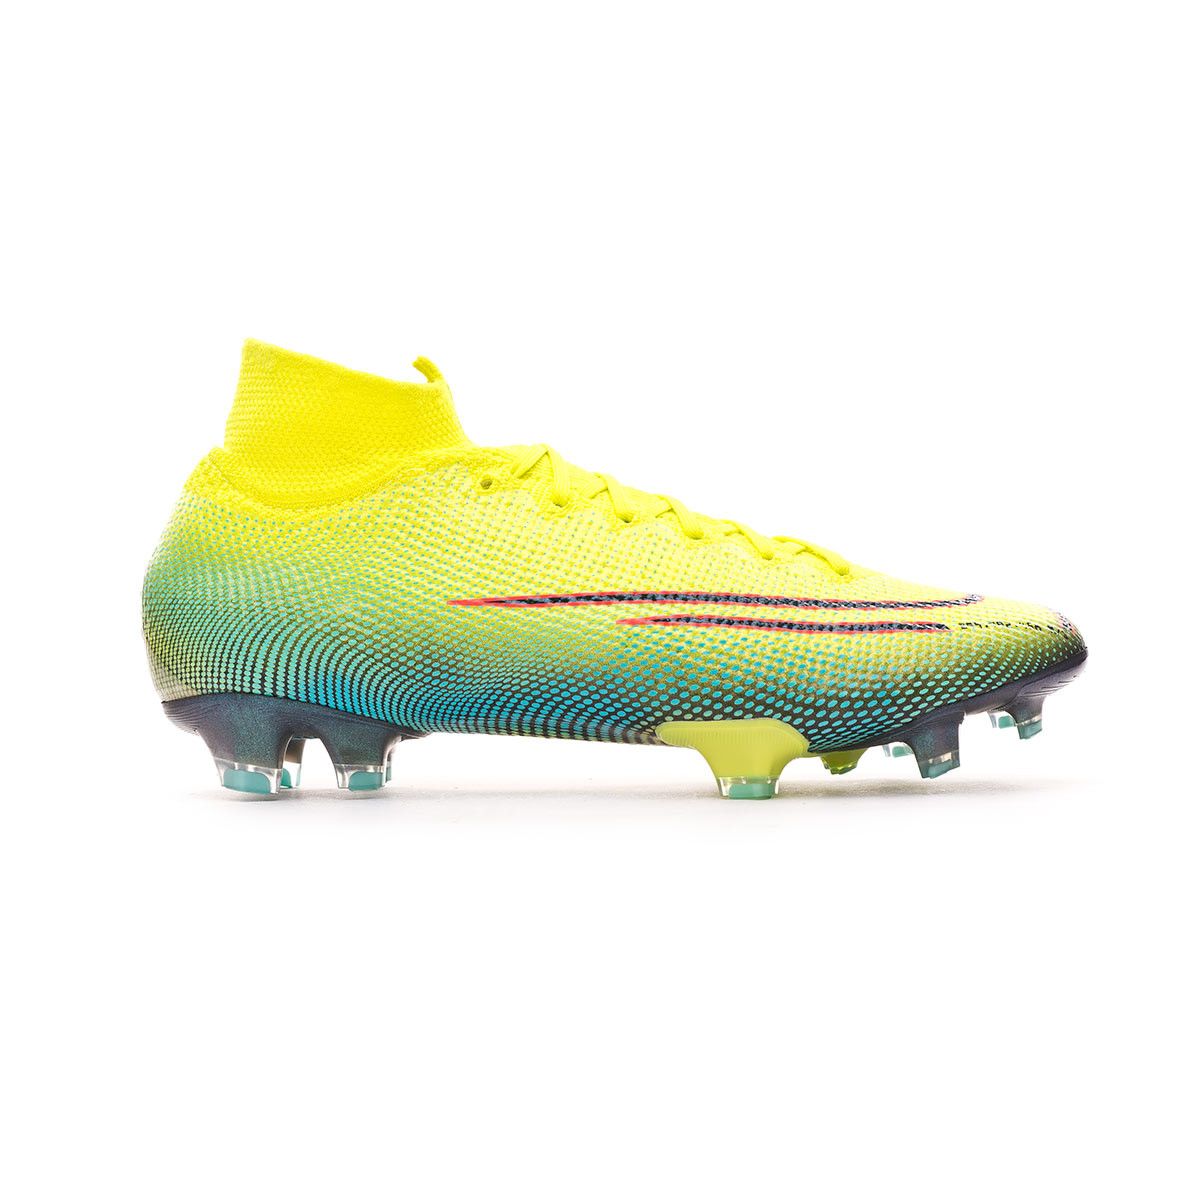 Nike Synthetic Mercurial Superfly 7 Elite Tf Artificial turf Soccer.